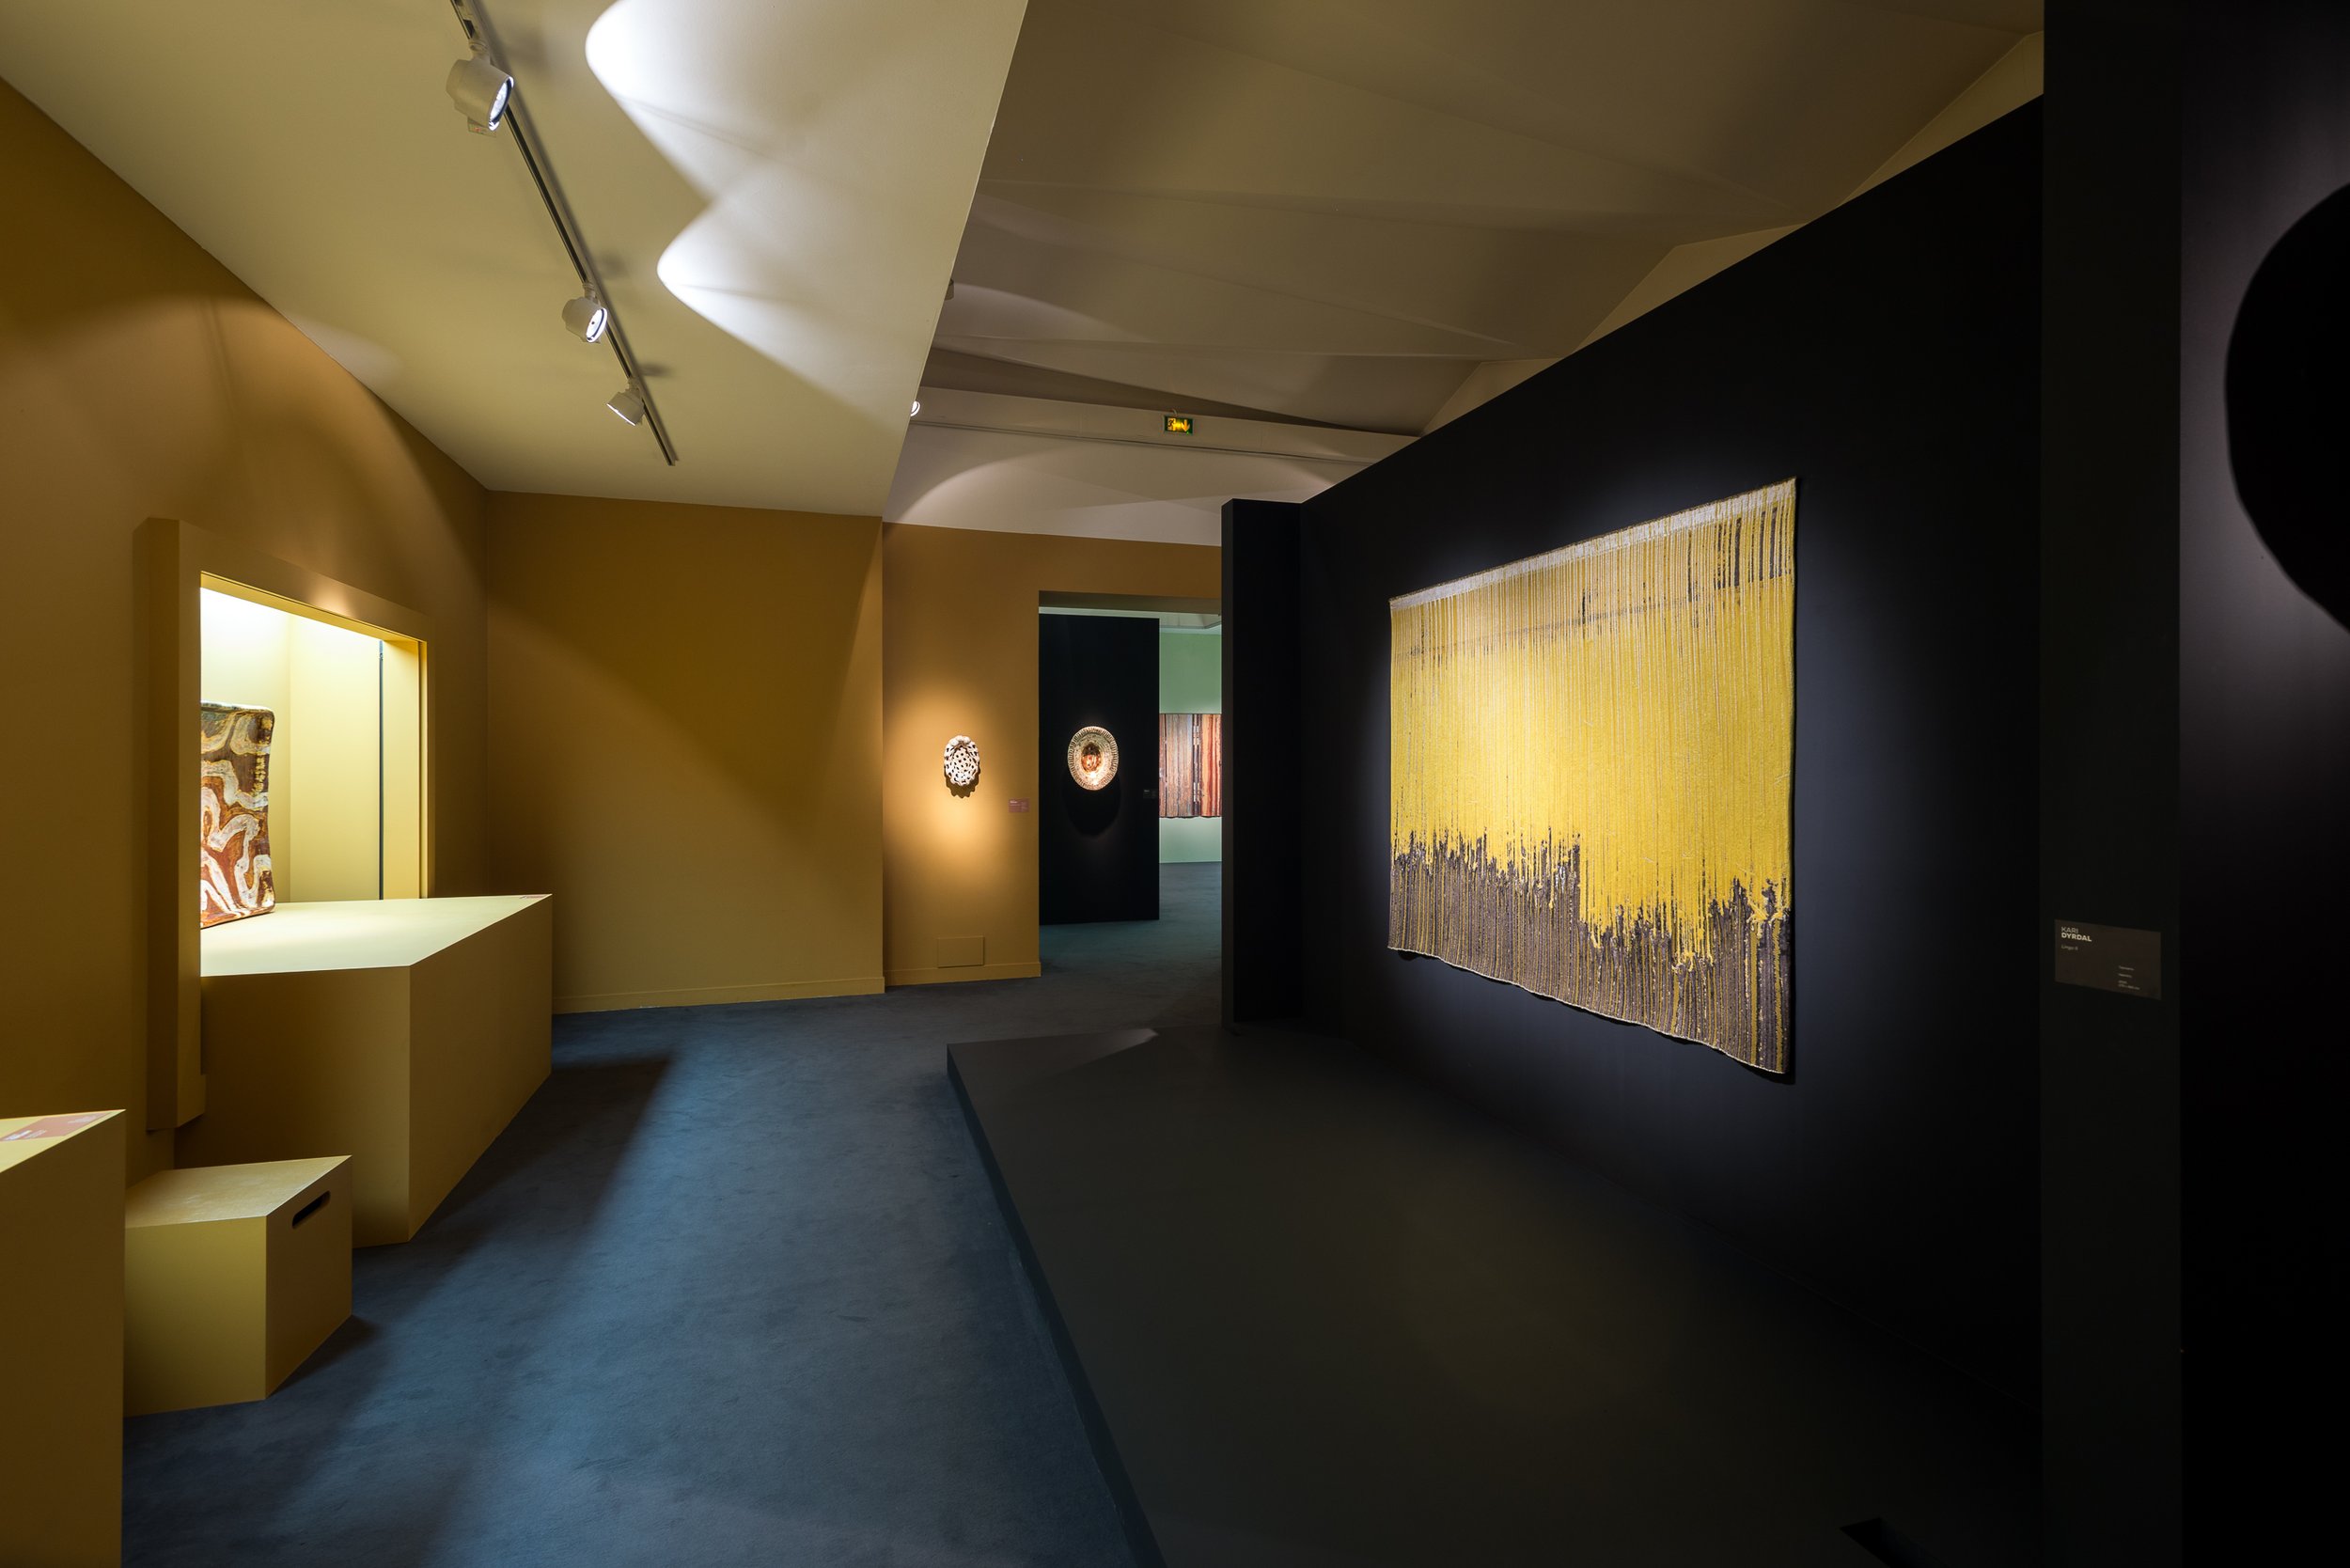 Installation View of Lingo in exhibition Forces of Nature, Sèvres Museum, Paris, France, 2018